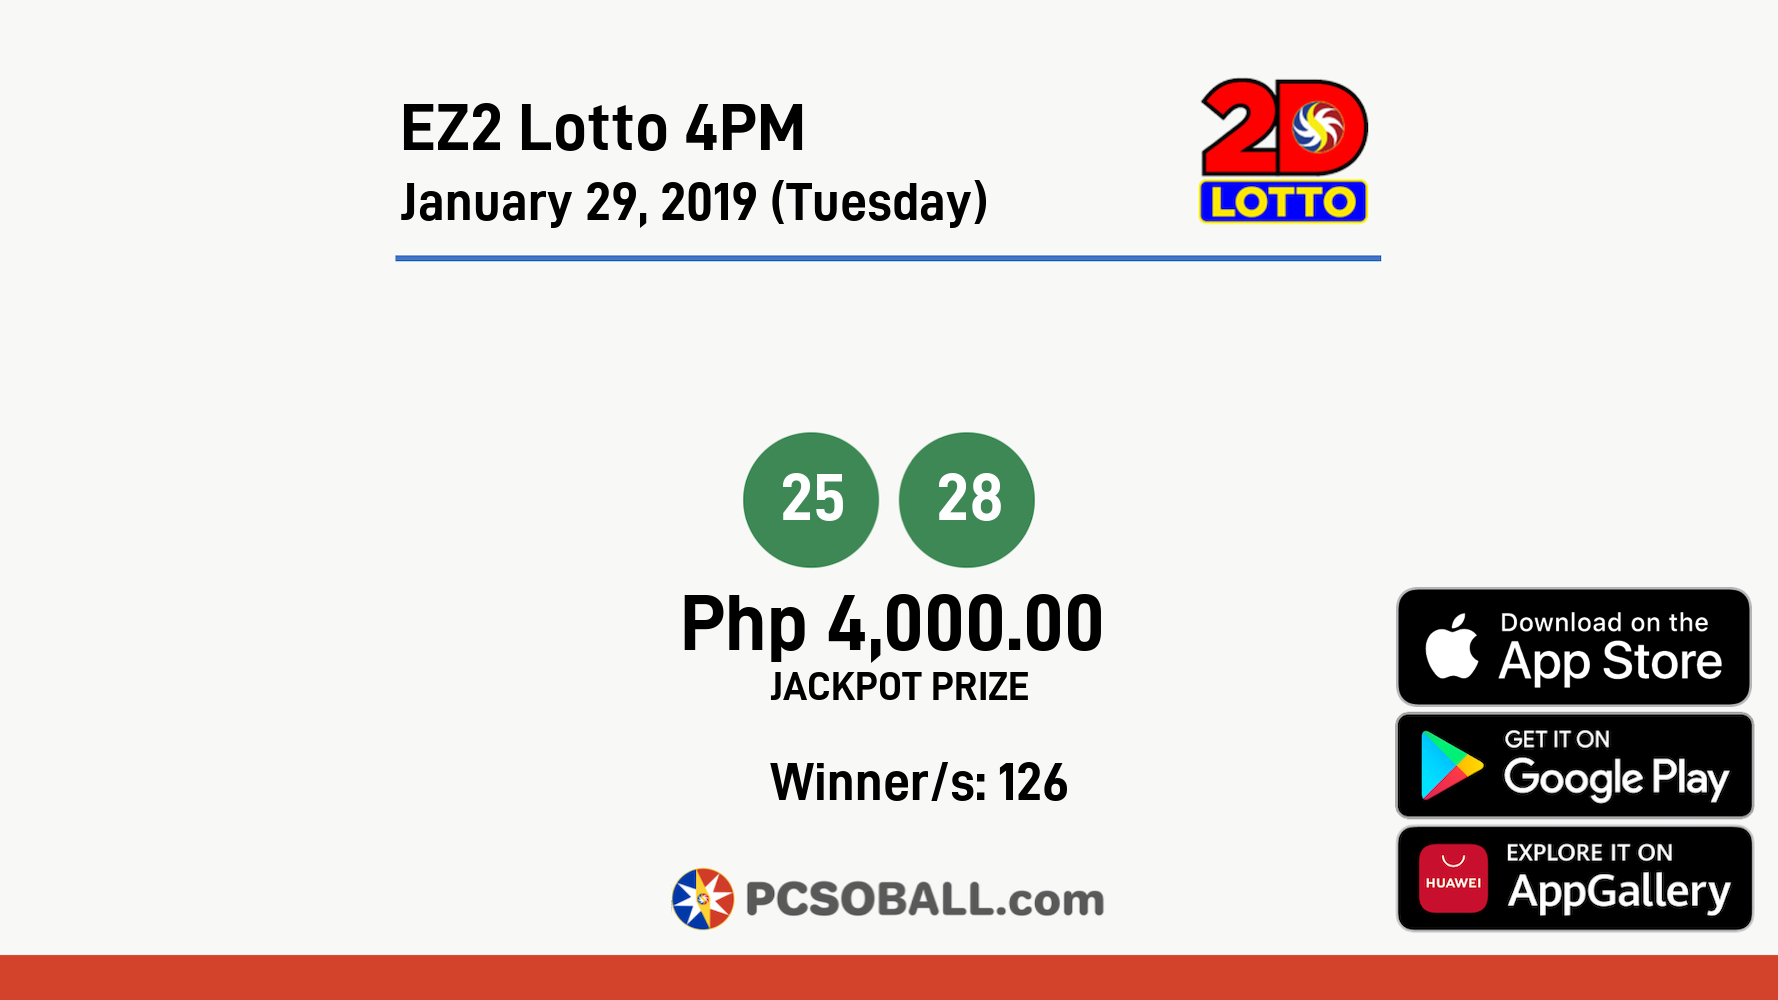 EZ2 Lotto 4PM January 29, 2019 (Tuesday) Result